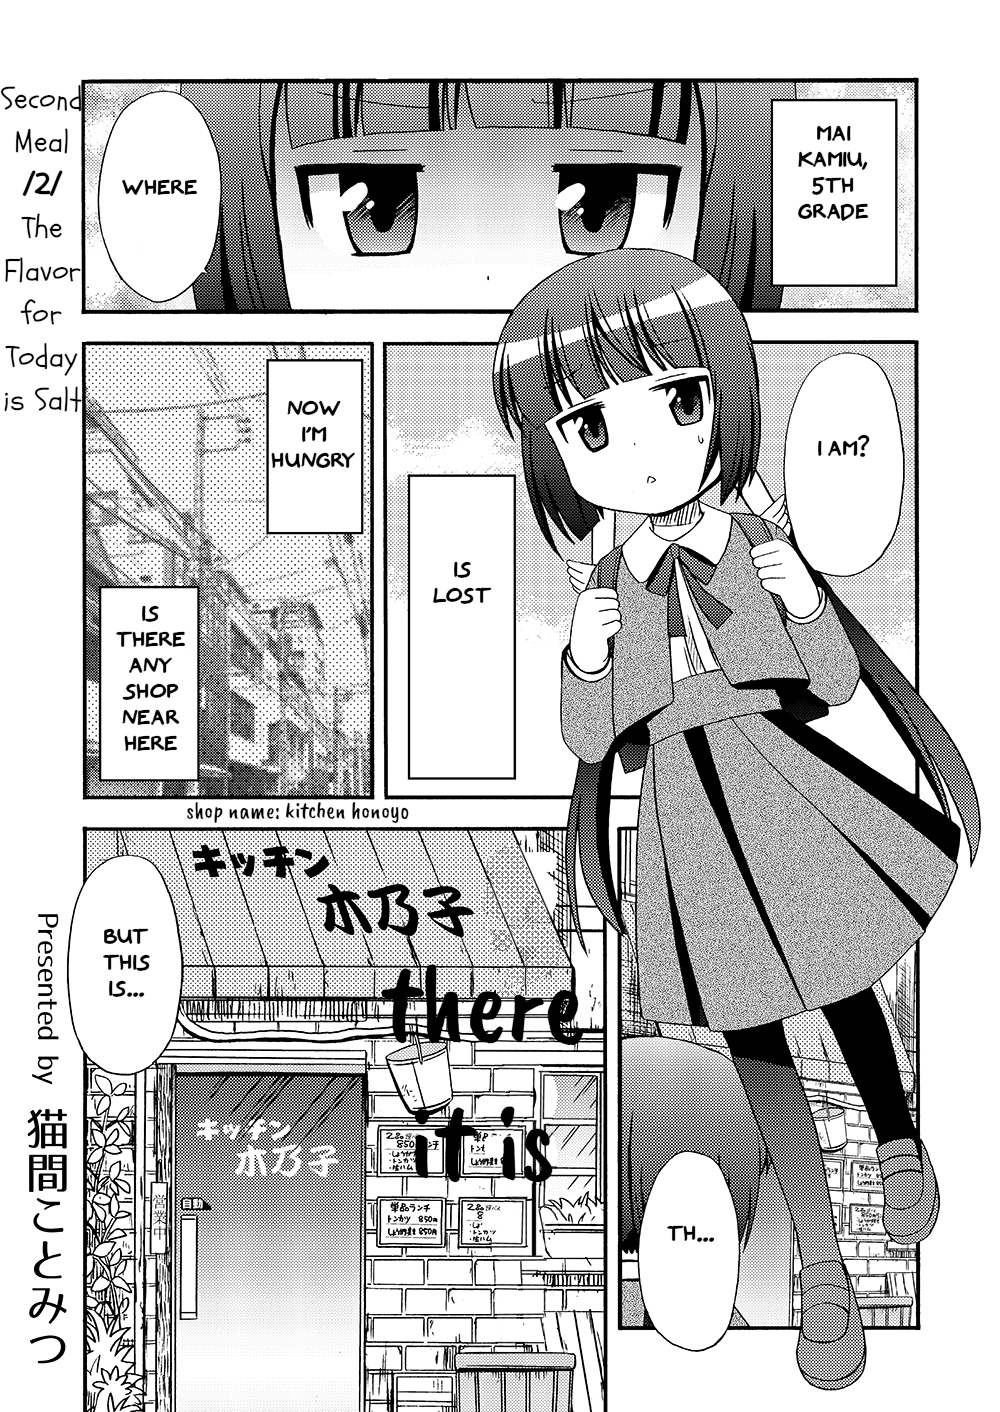 Loli Meshi ~Okawari!~ Chapter 2: The Flavor For Today Is Salt - Picture 1